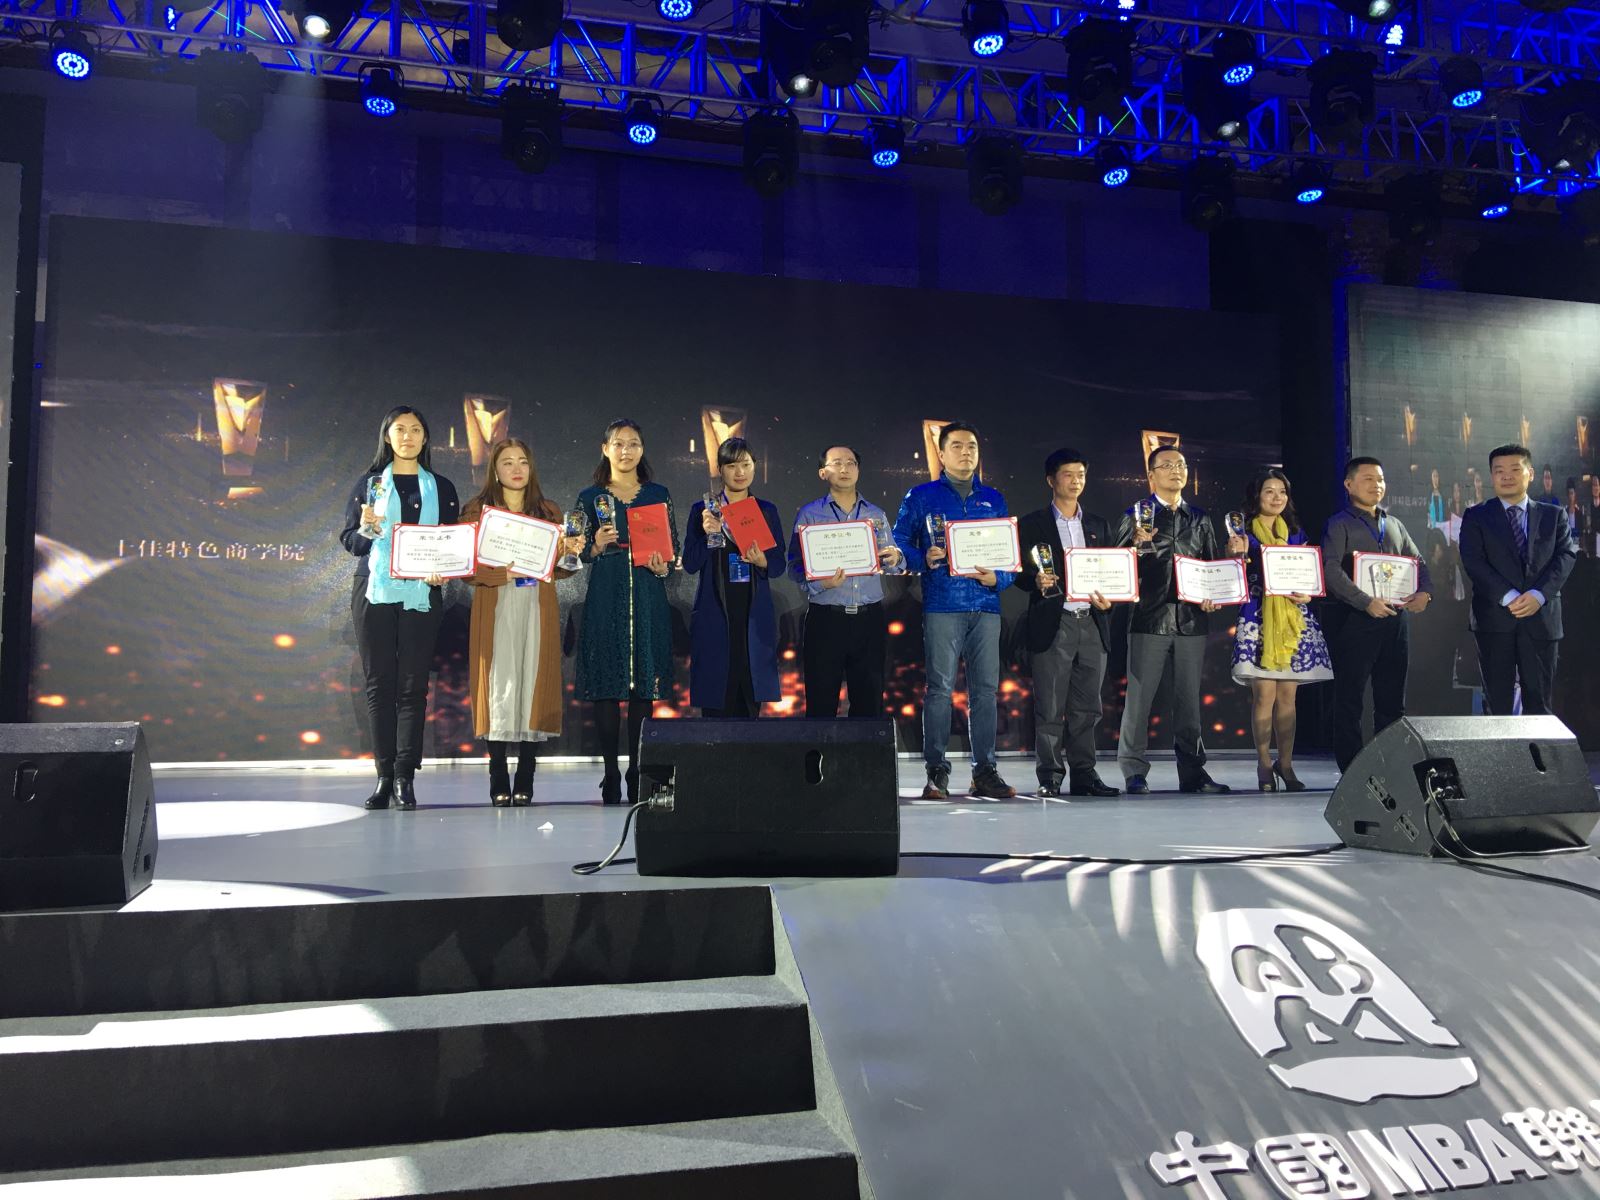 Our MBA representatives attended the Tenth China MBA league leaders' annual meeting